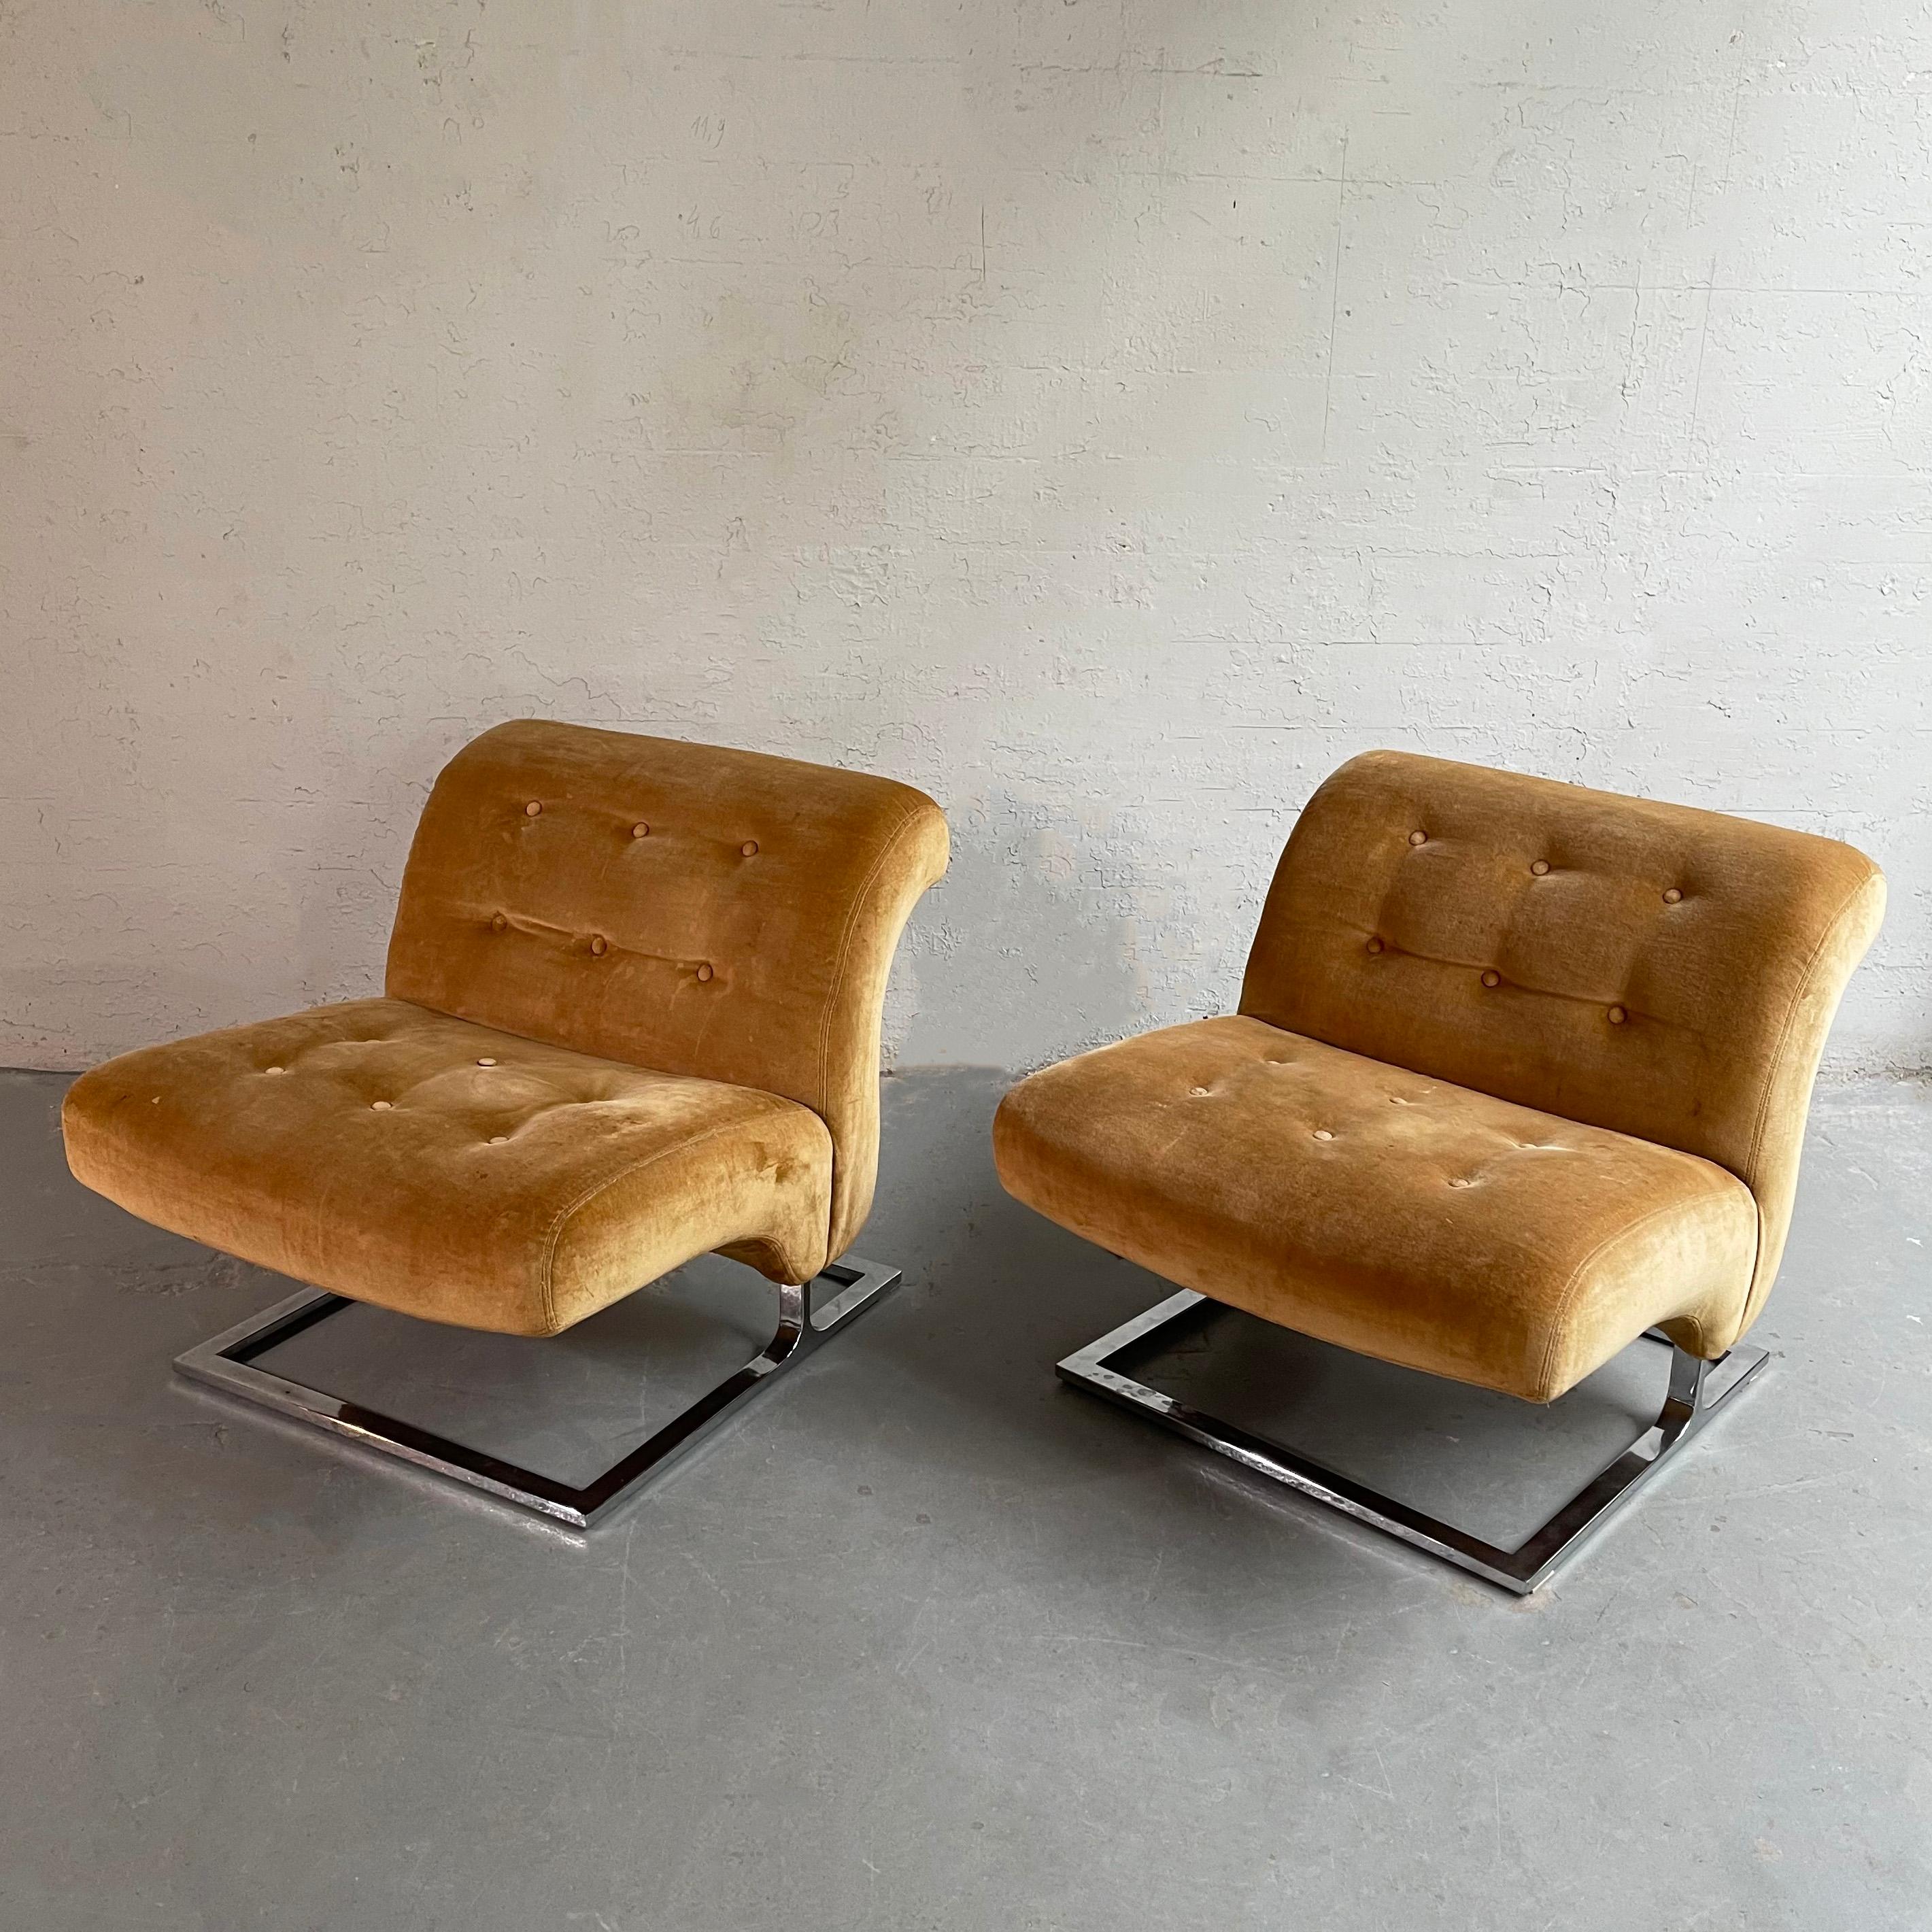 Pair Of Mid-Century Modern Chrome Cantilever Slipper Lounge Chairs For Sale 2